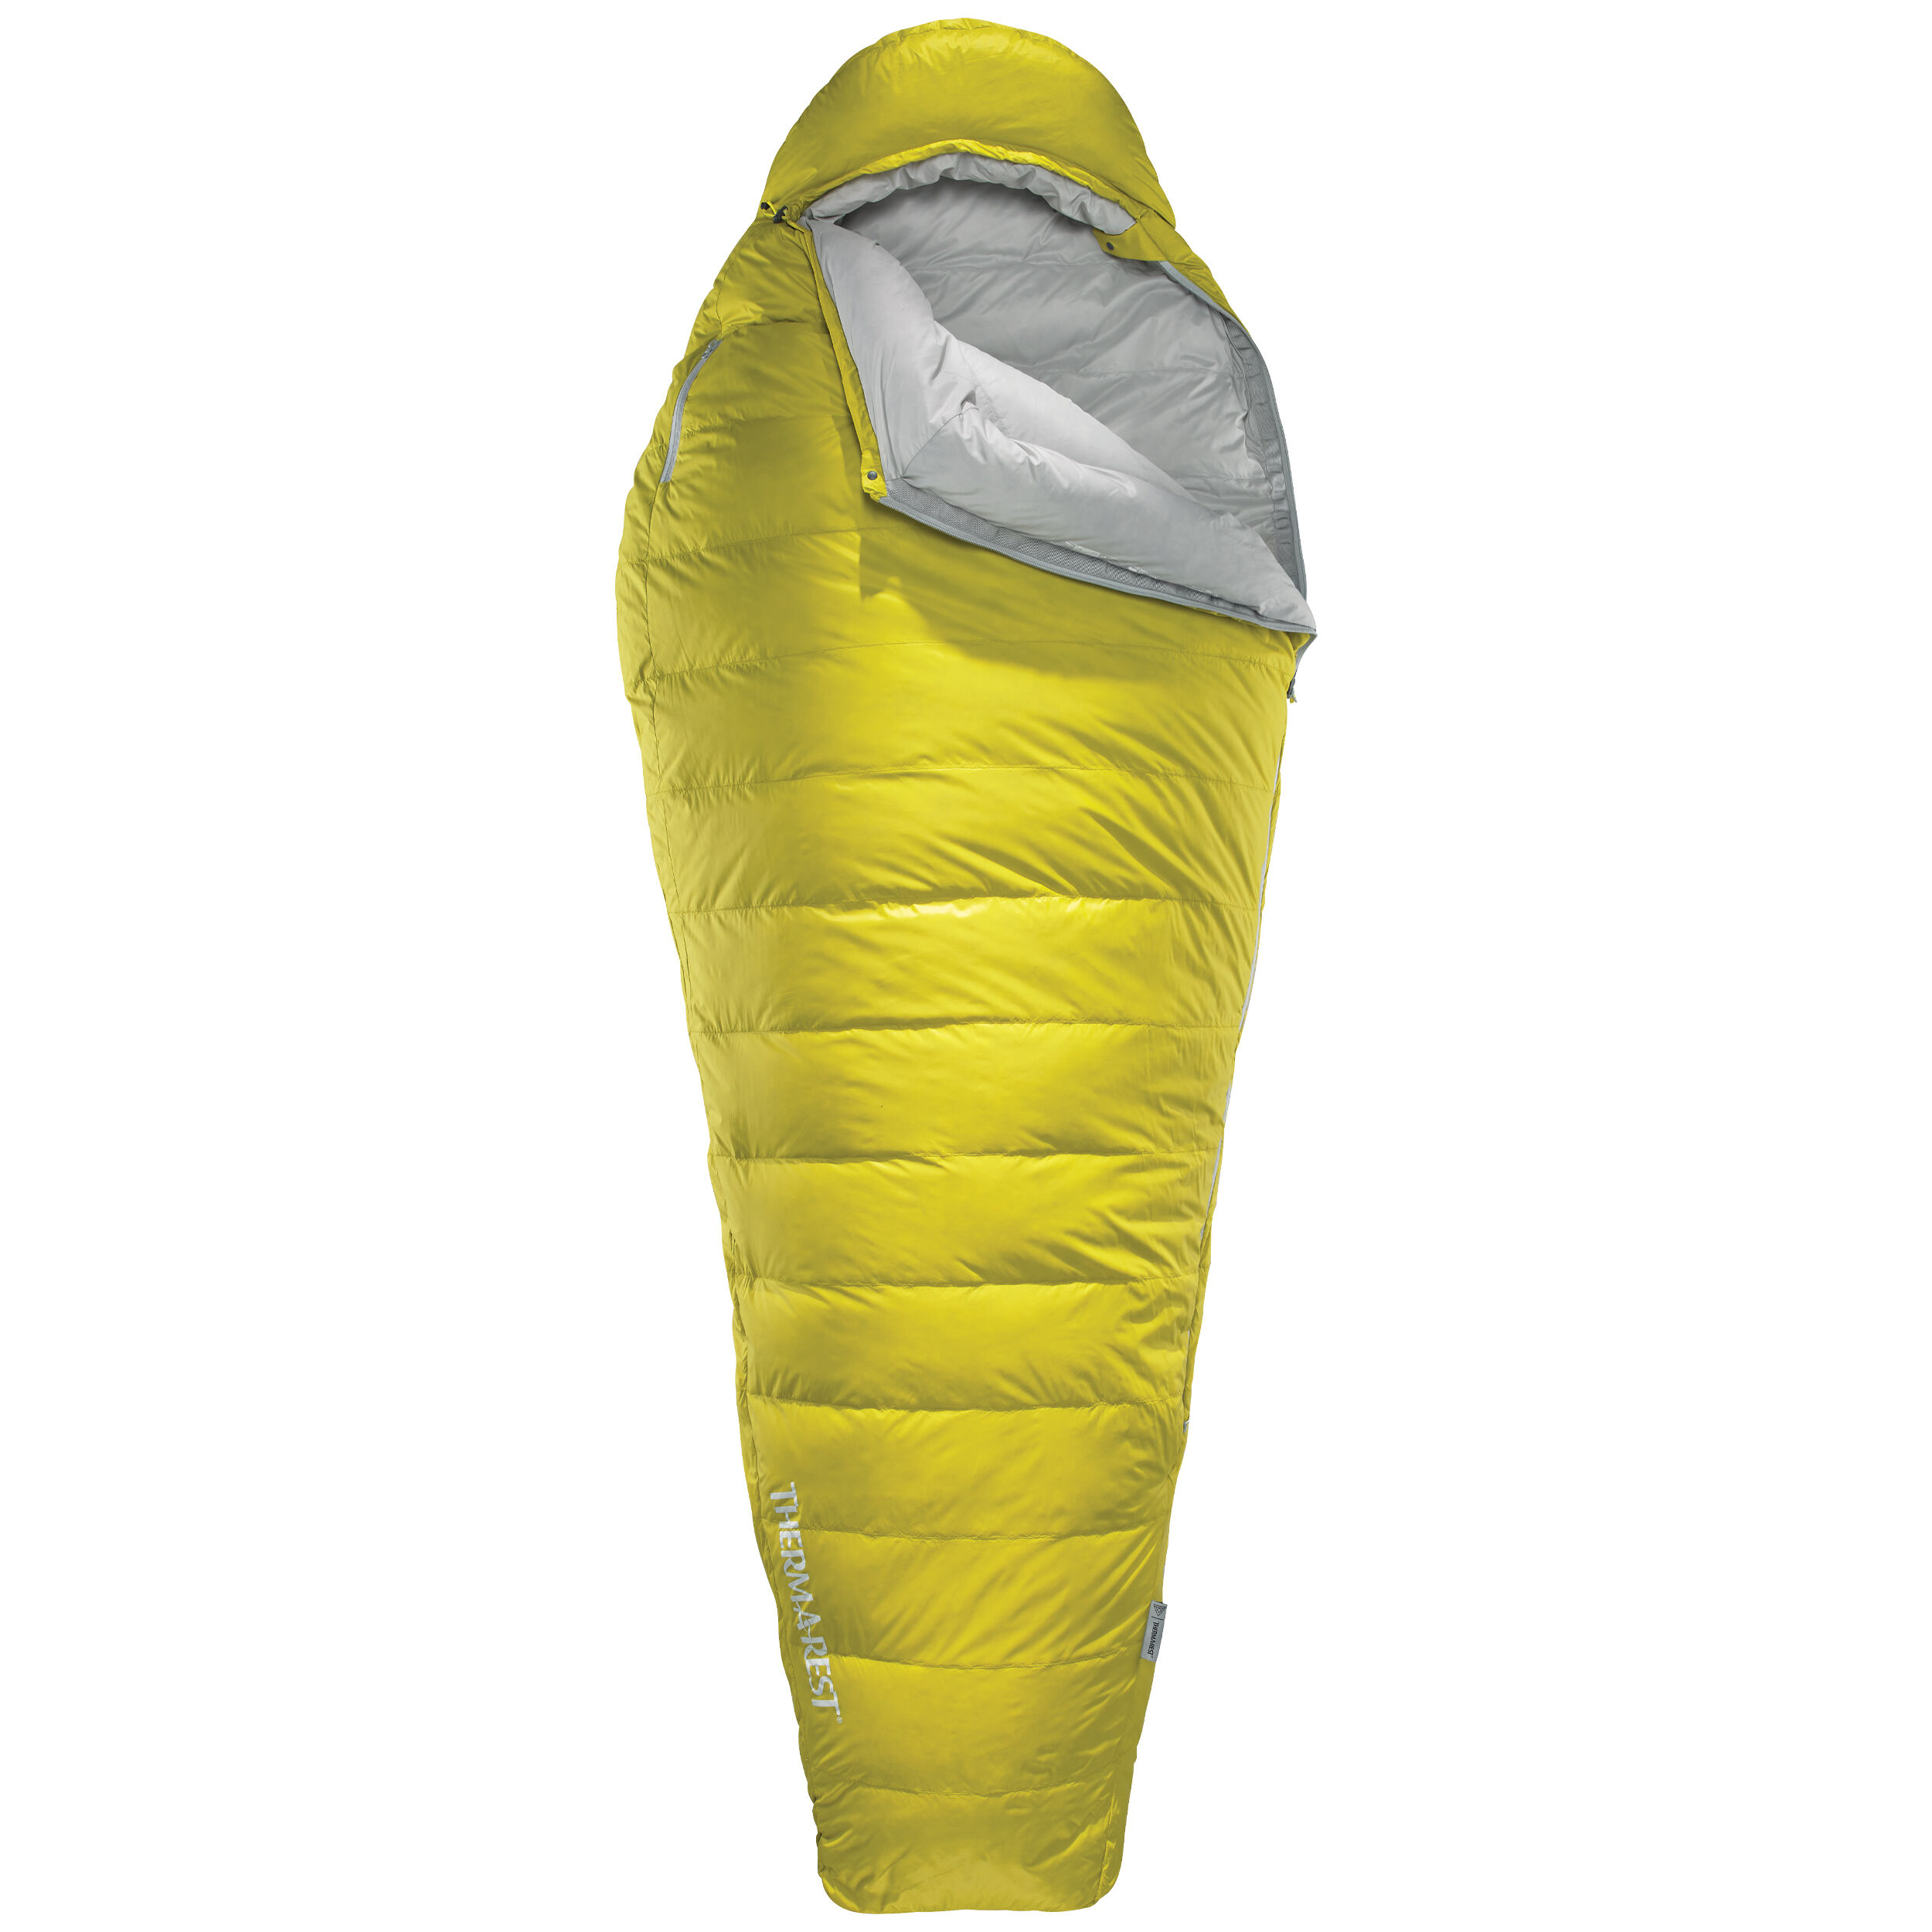 New Products | Top Outdoor Gear & Camping Equipment | | Therm-a-Rest